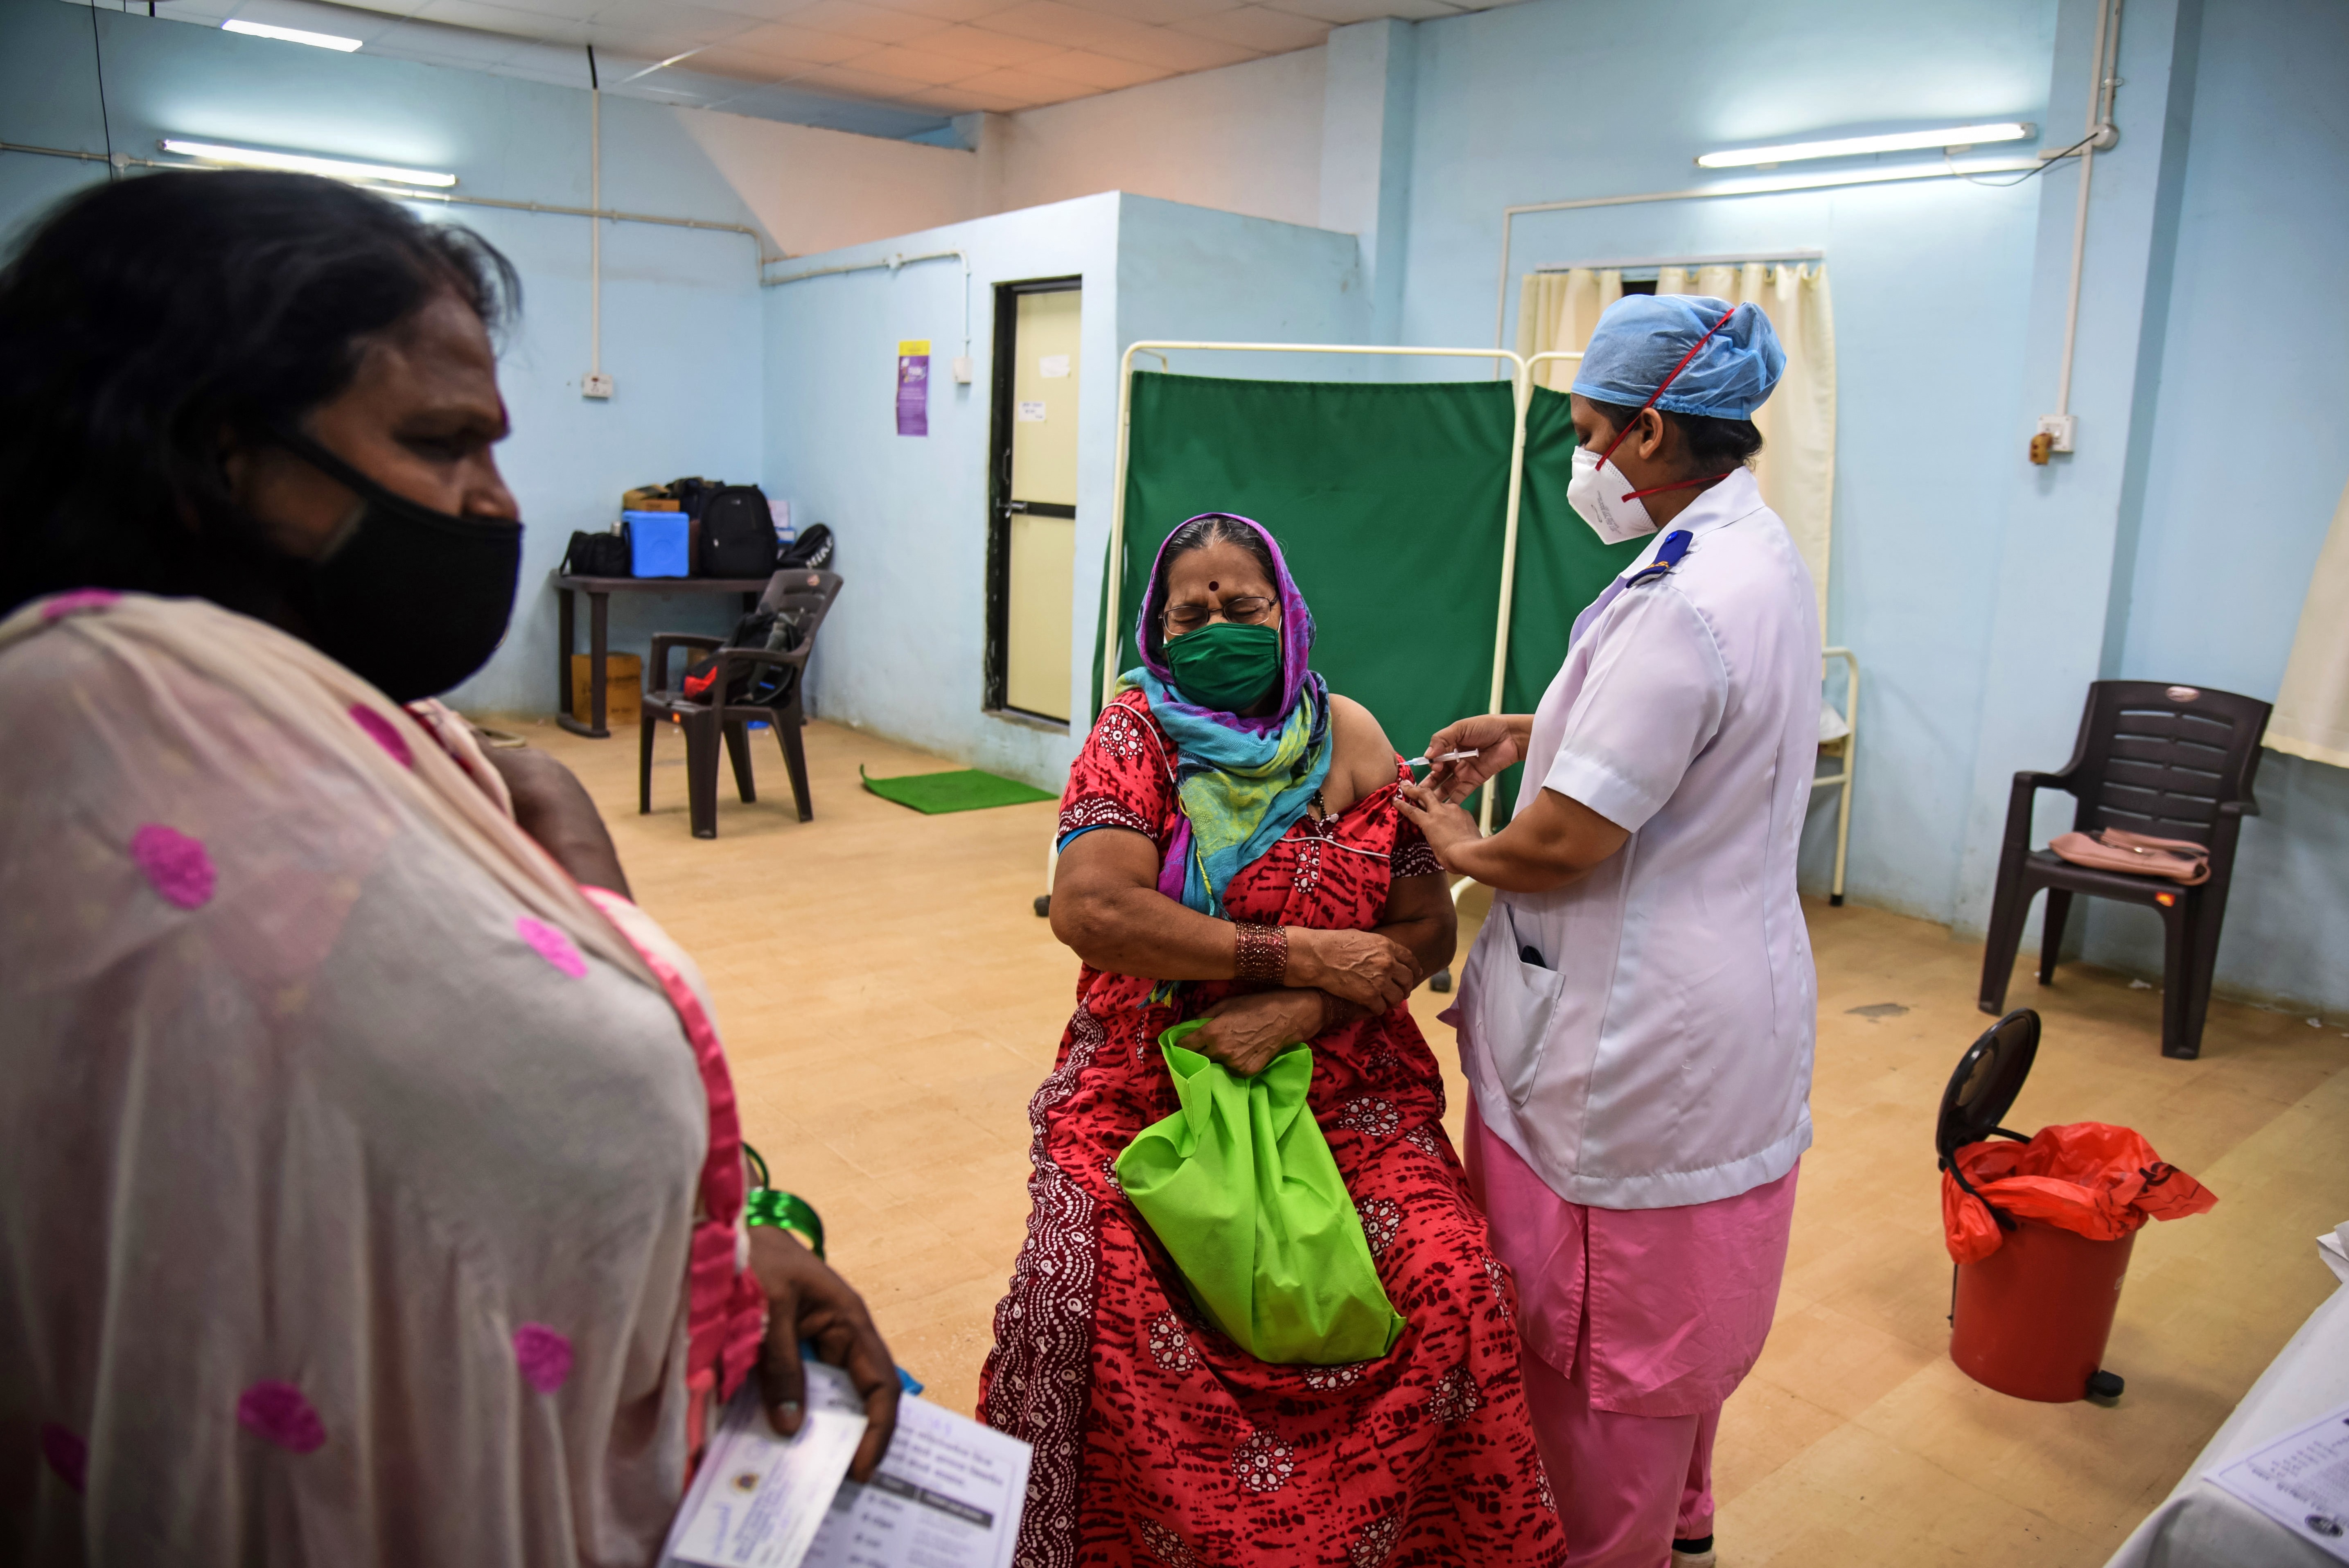 MUMBAI, INDIA - APRIL 29: People receive their Covid-19 vaccines at a mass vaccination center on April 29, 2021 in Mumbai, India. With recorded cases crossing 380,000 a day and 3000 deaths in the last 24 hours, India has more than 2 million active cases o (Foto: Getty Images)